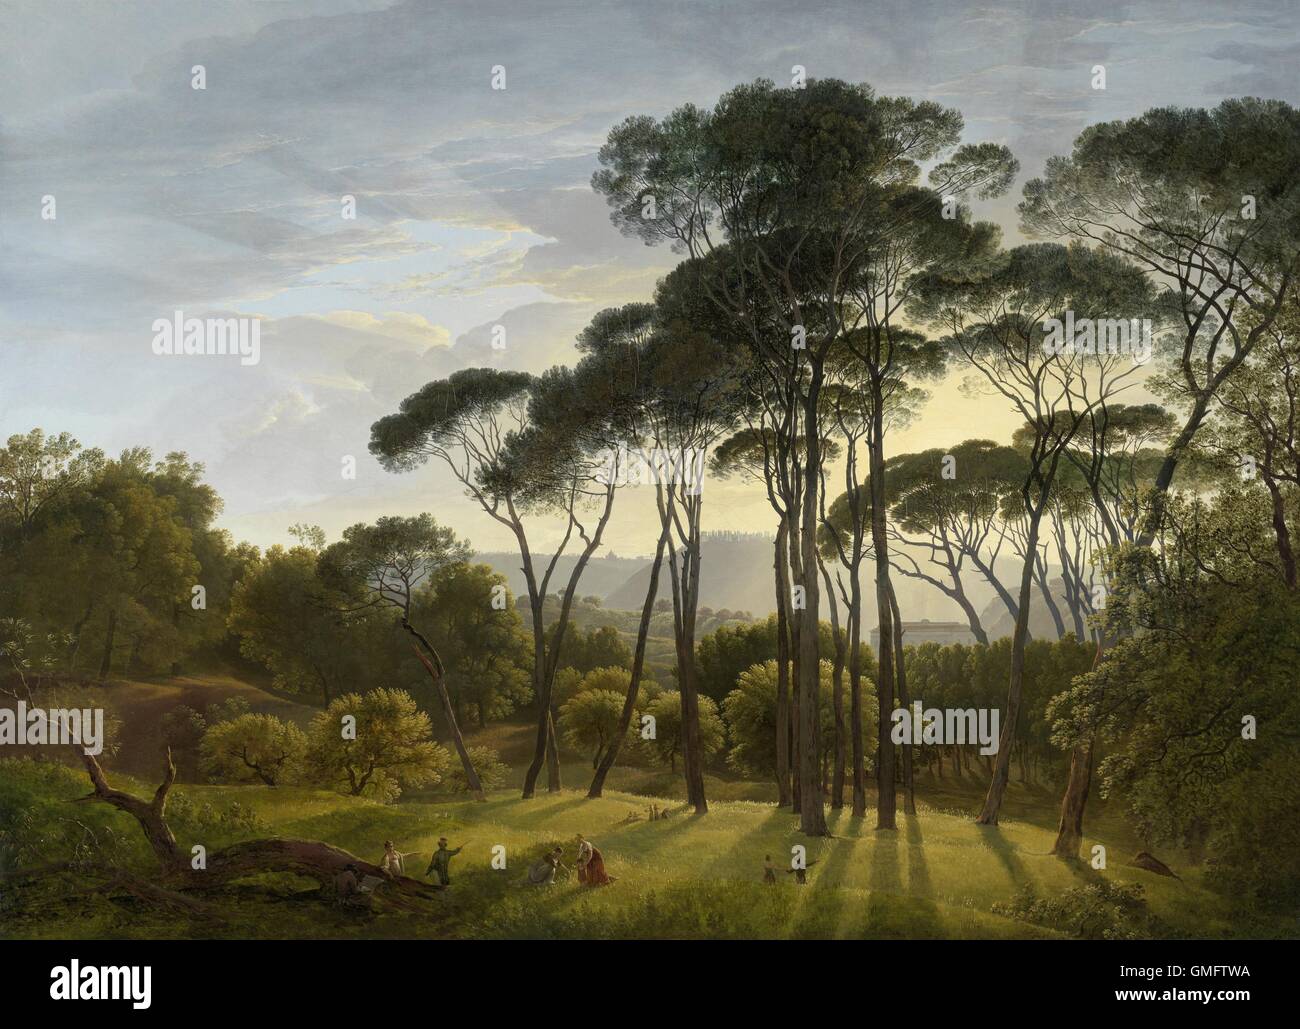 Italian Landscape with Umbrella Pines, by Hendrik Voogd, 1805, Dutch painting, oil on canvas. The sun casts long shadows, and the trees stand out sharply against the sky in the Gardens of the Villa Borghese in Rome. Strolling figures and a working artist are in the foreground. (BSLOC 2016 1 165) Stock Photo